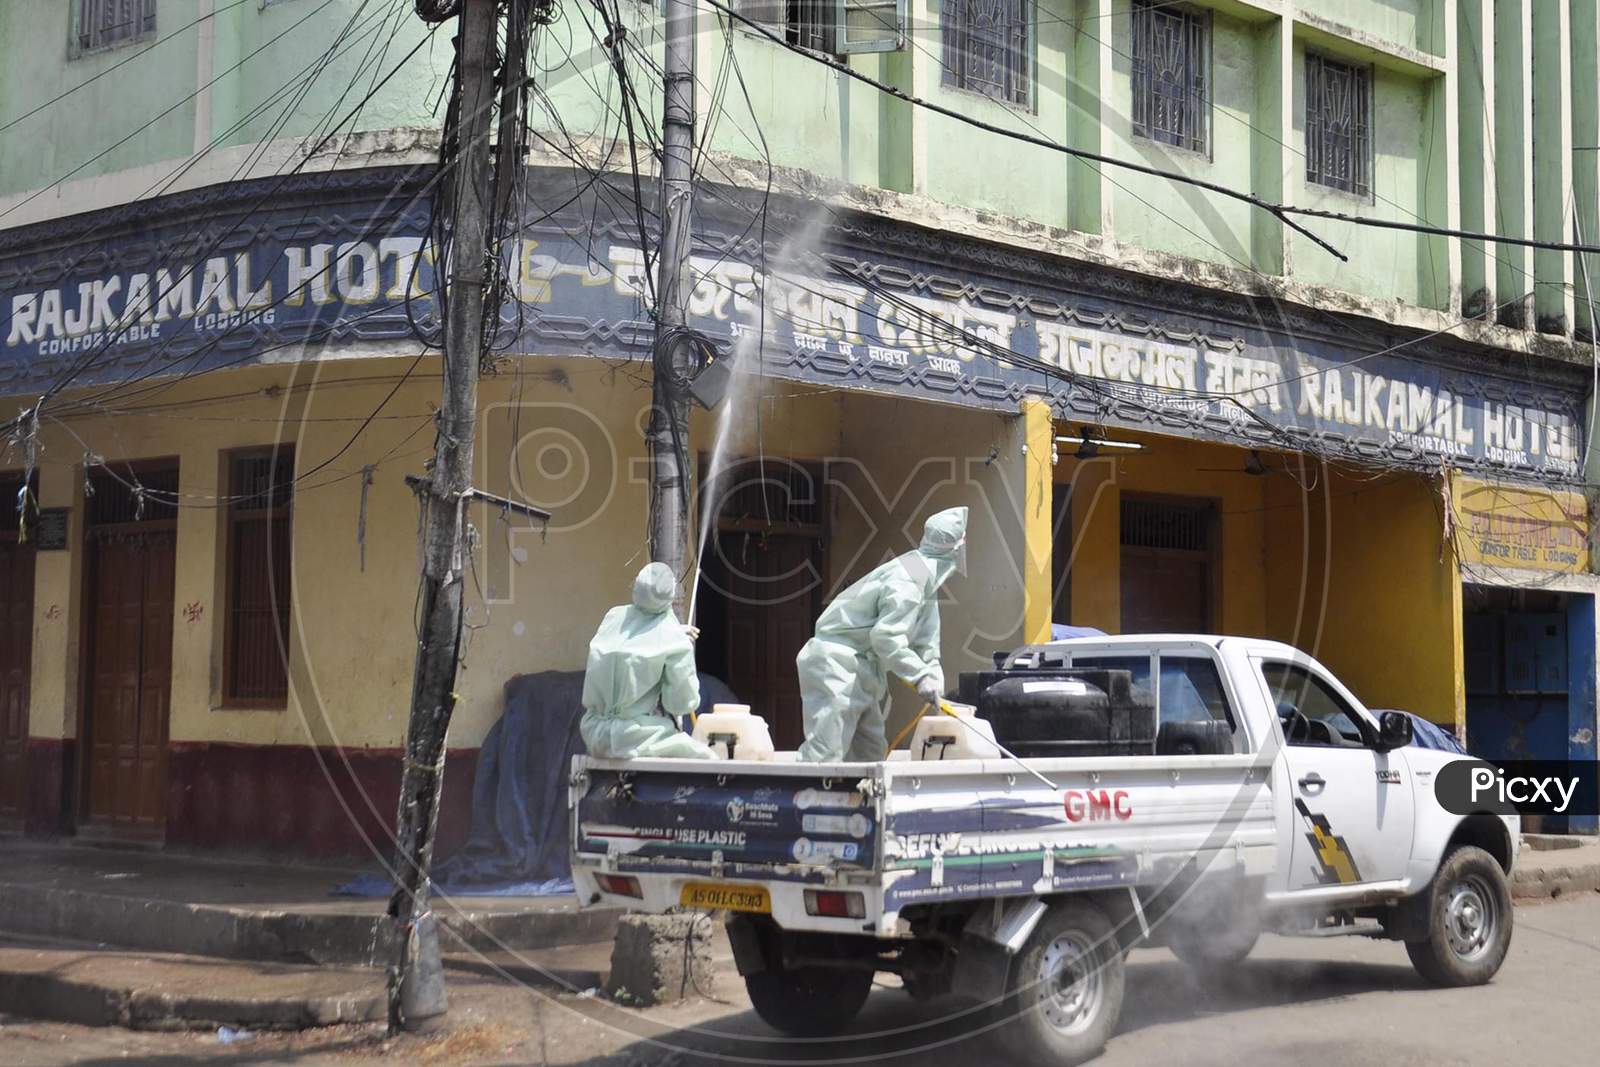 Municipal Workers Sanitize A Locality At Fancy Bazar Area After Reports Of A Coronavirus Positive Patient  During Nationwide Lockdown Amidst Coronavirus Or COVID-19 Pandemic  In Guwahati, Tuesday, May 12, 2020.